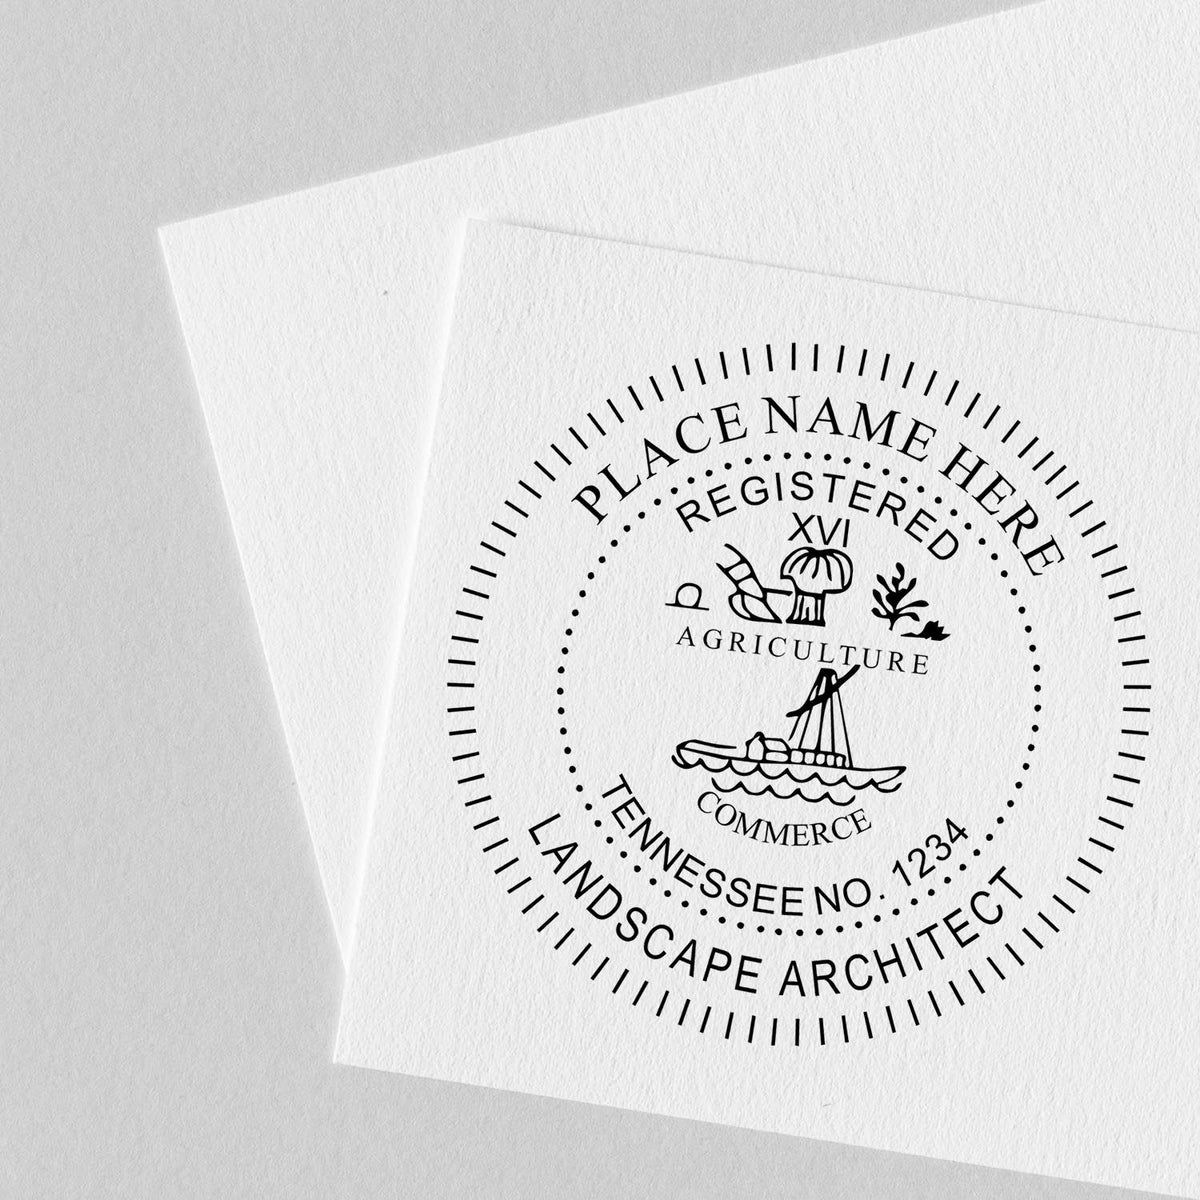 Slim Pre-Inked Tennessee Landscape Architect Seal Stamp in use photo showing a stamped imprint of the Slim Pre-Inked Tennessee Landscape Architect Seal Stamp